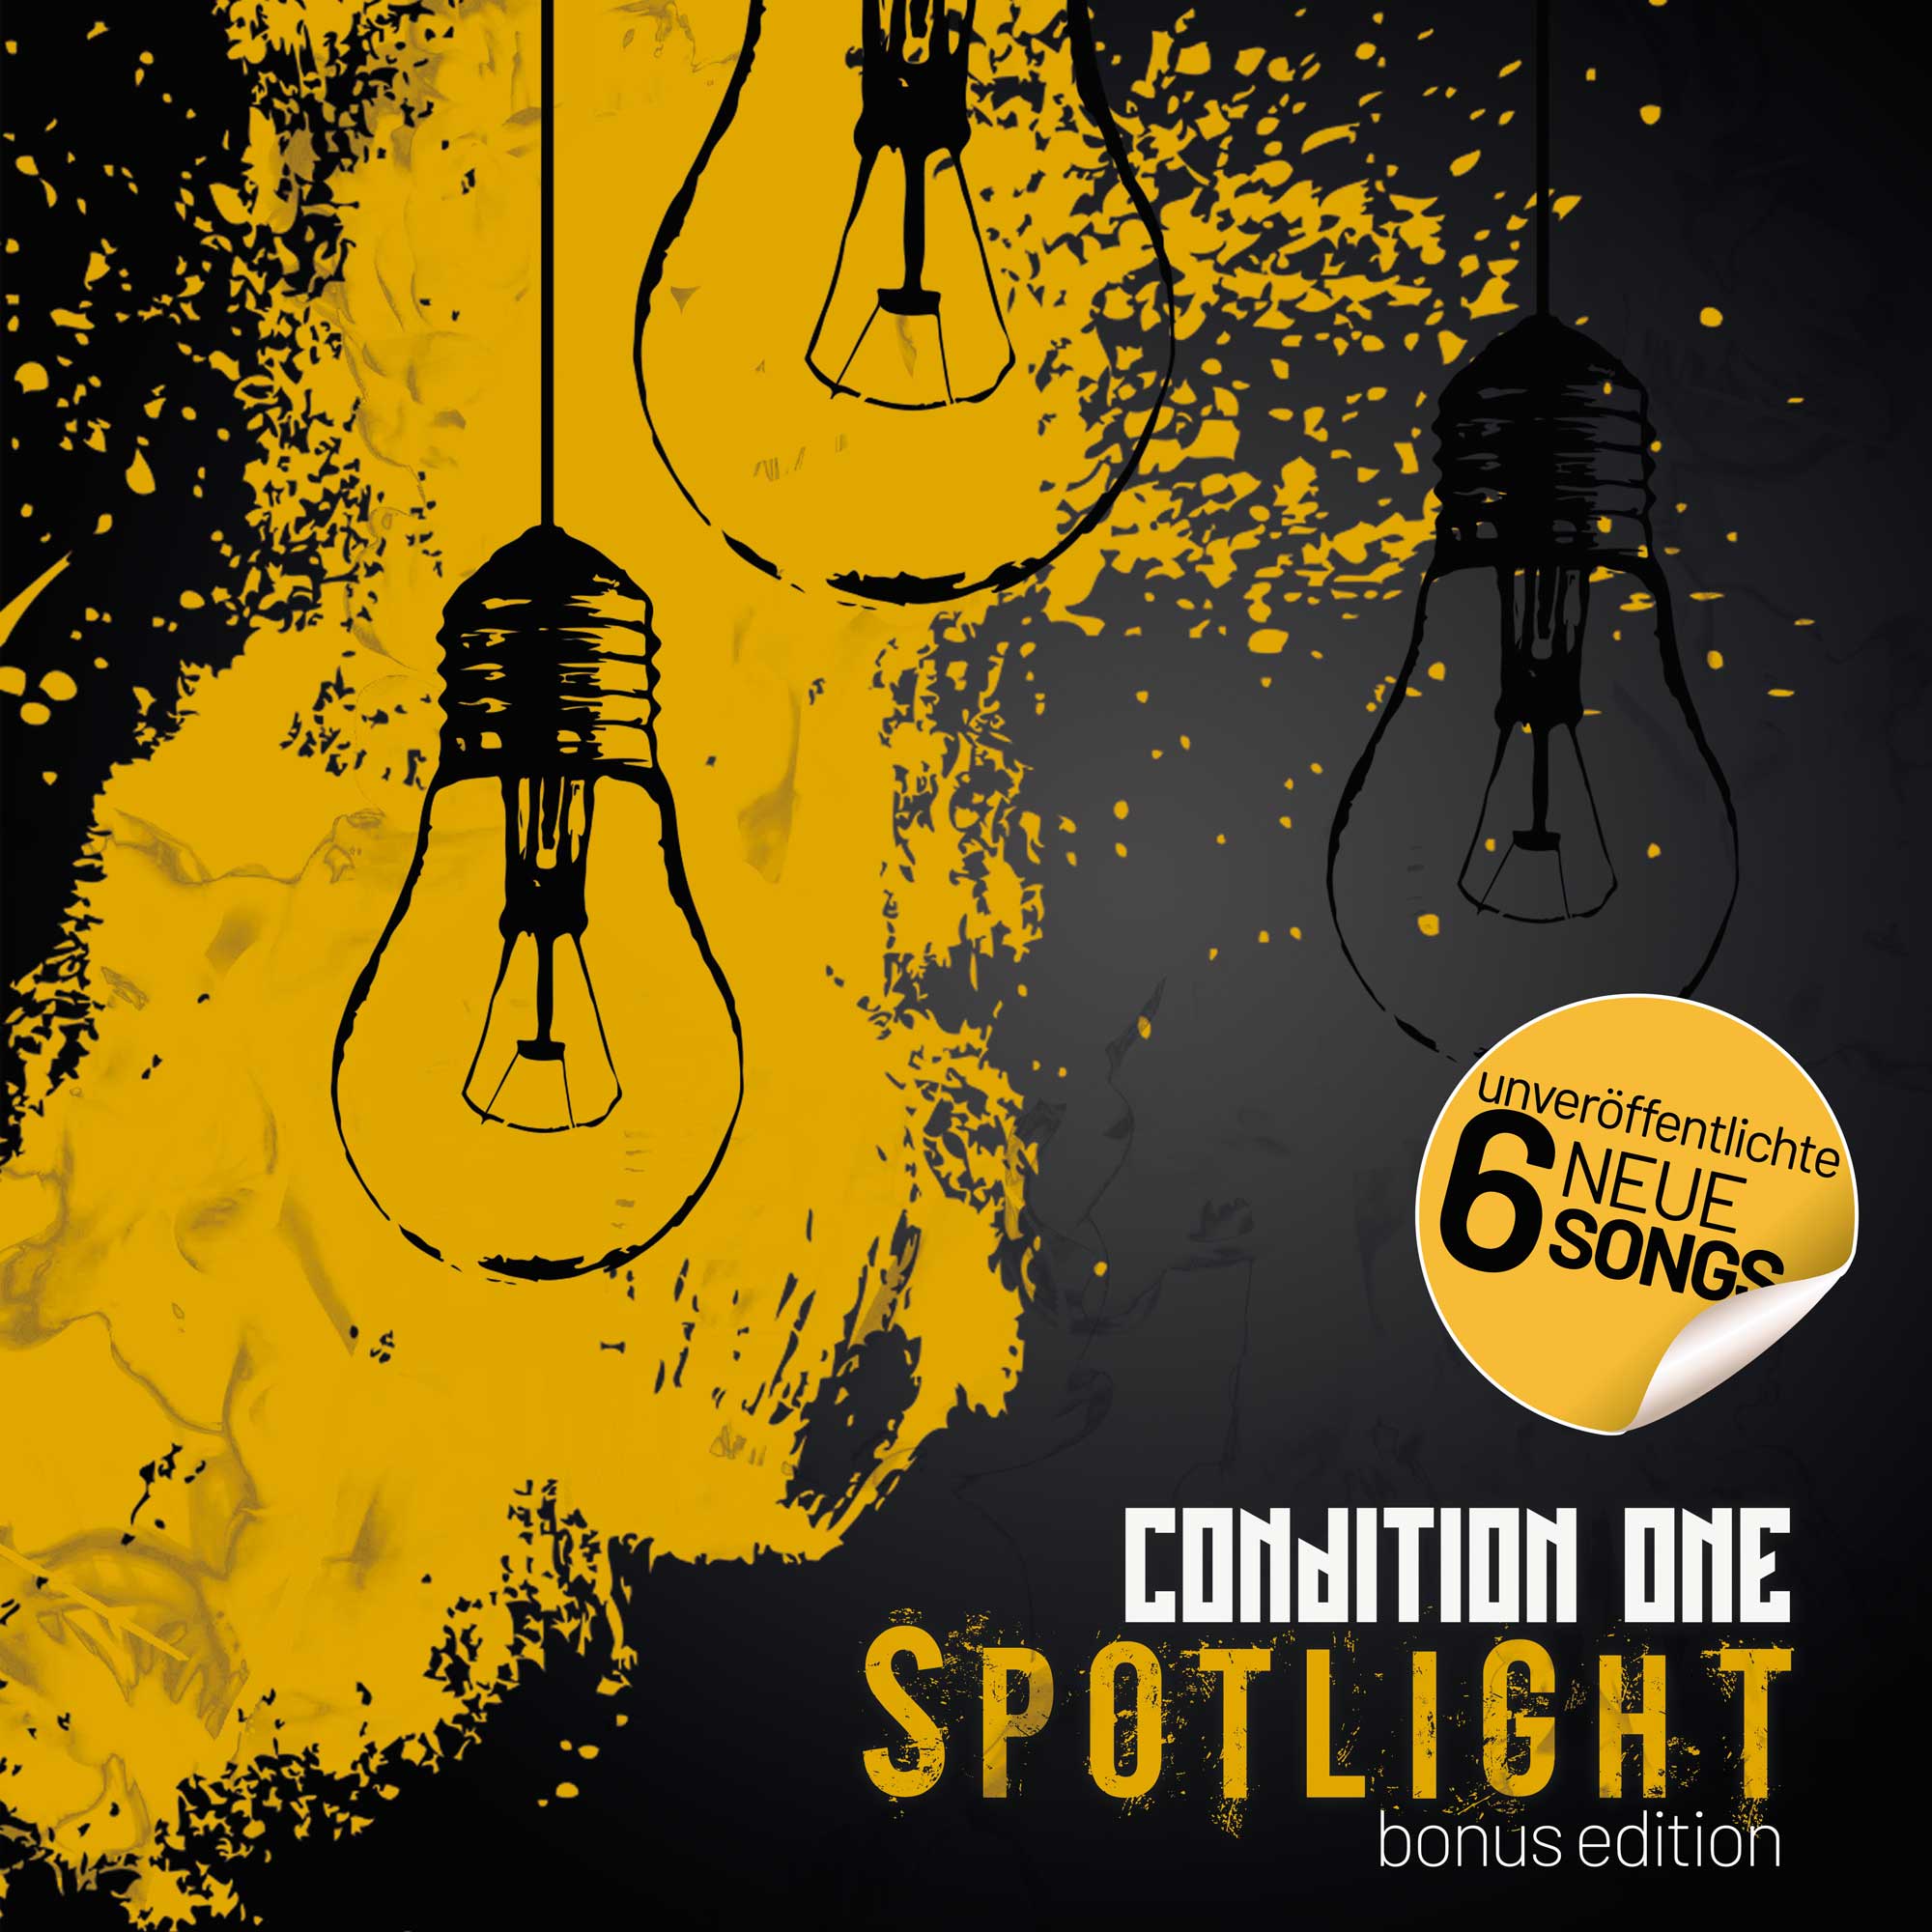 Condition One - Stand By Me - Condition One - Spotlight (Bonus Edition)